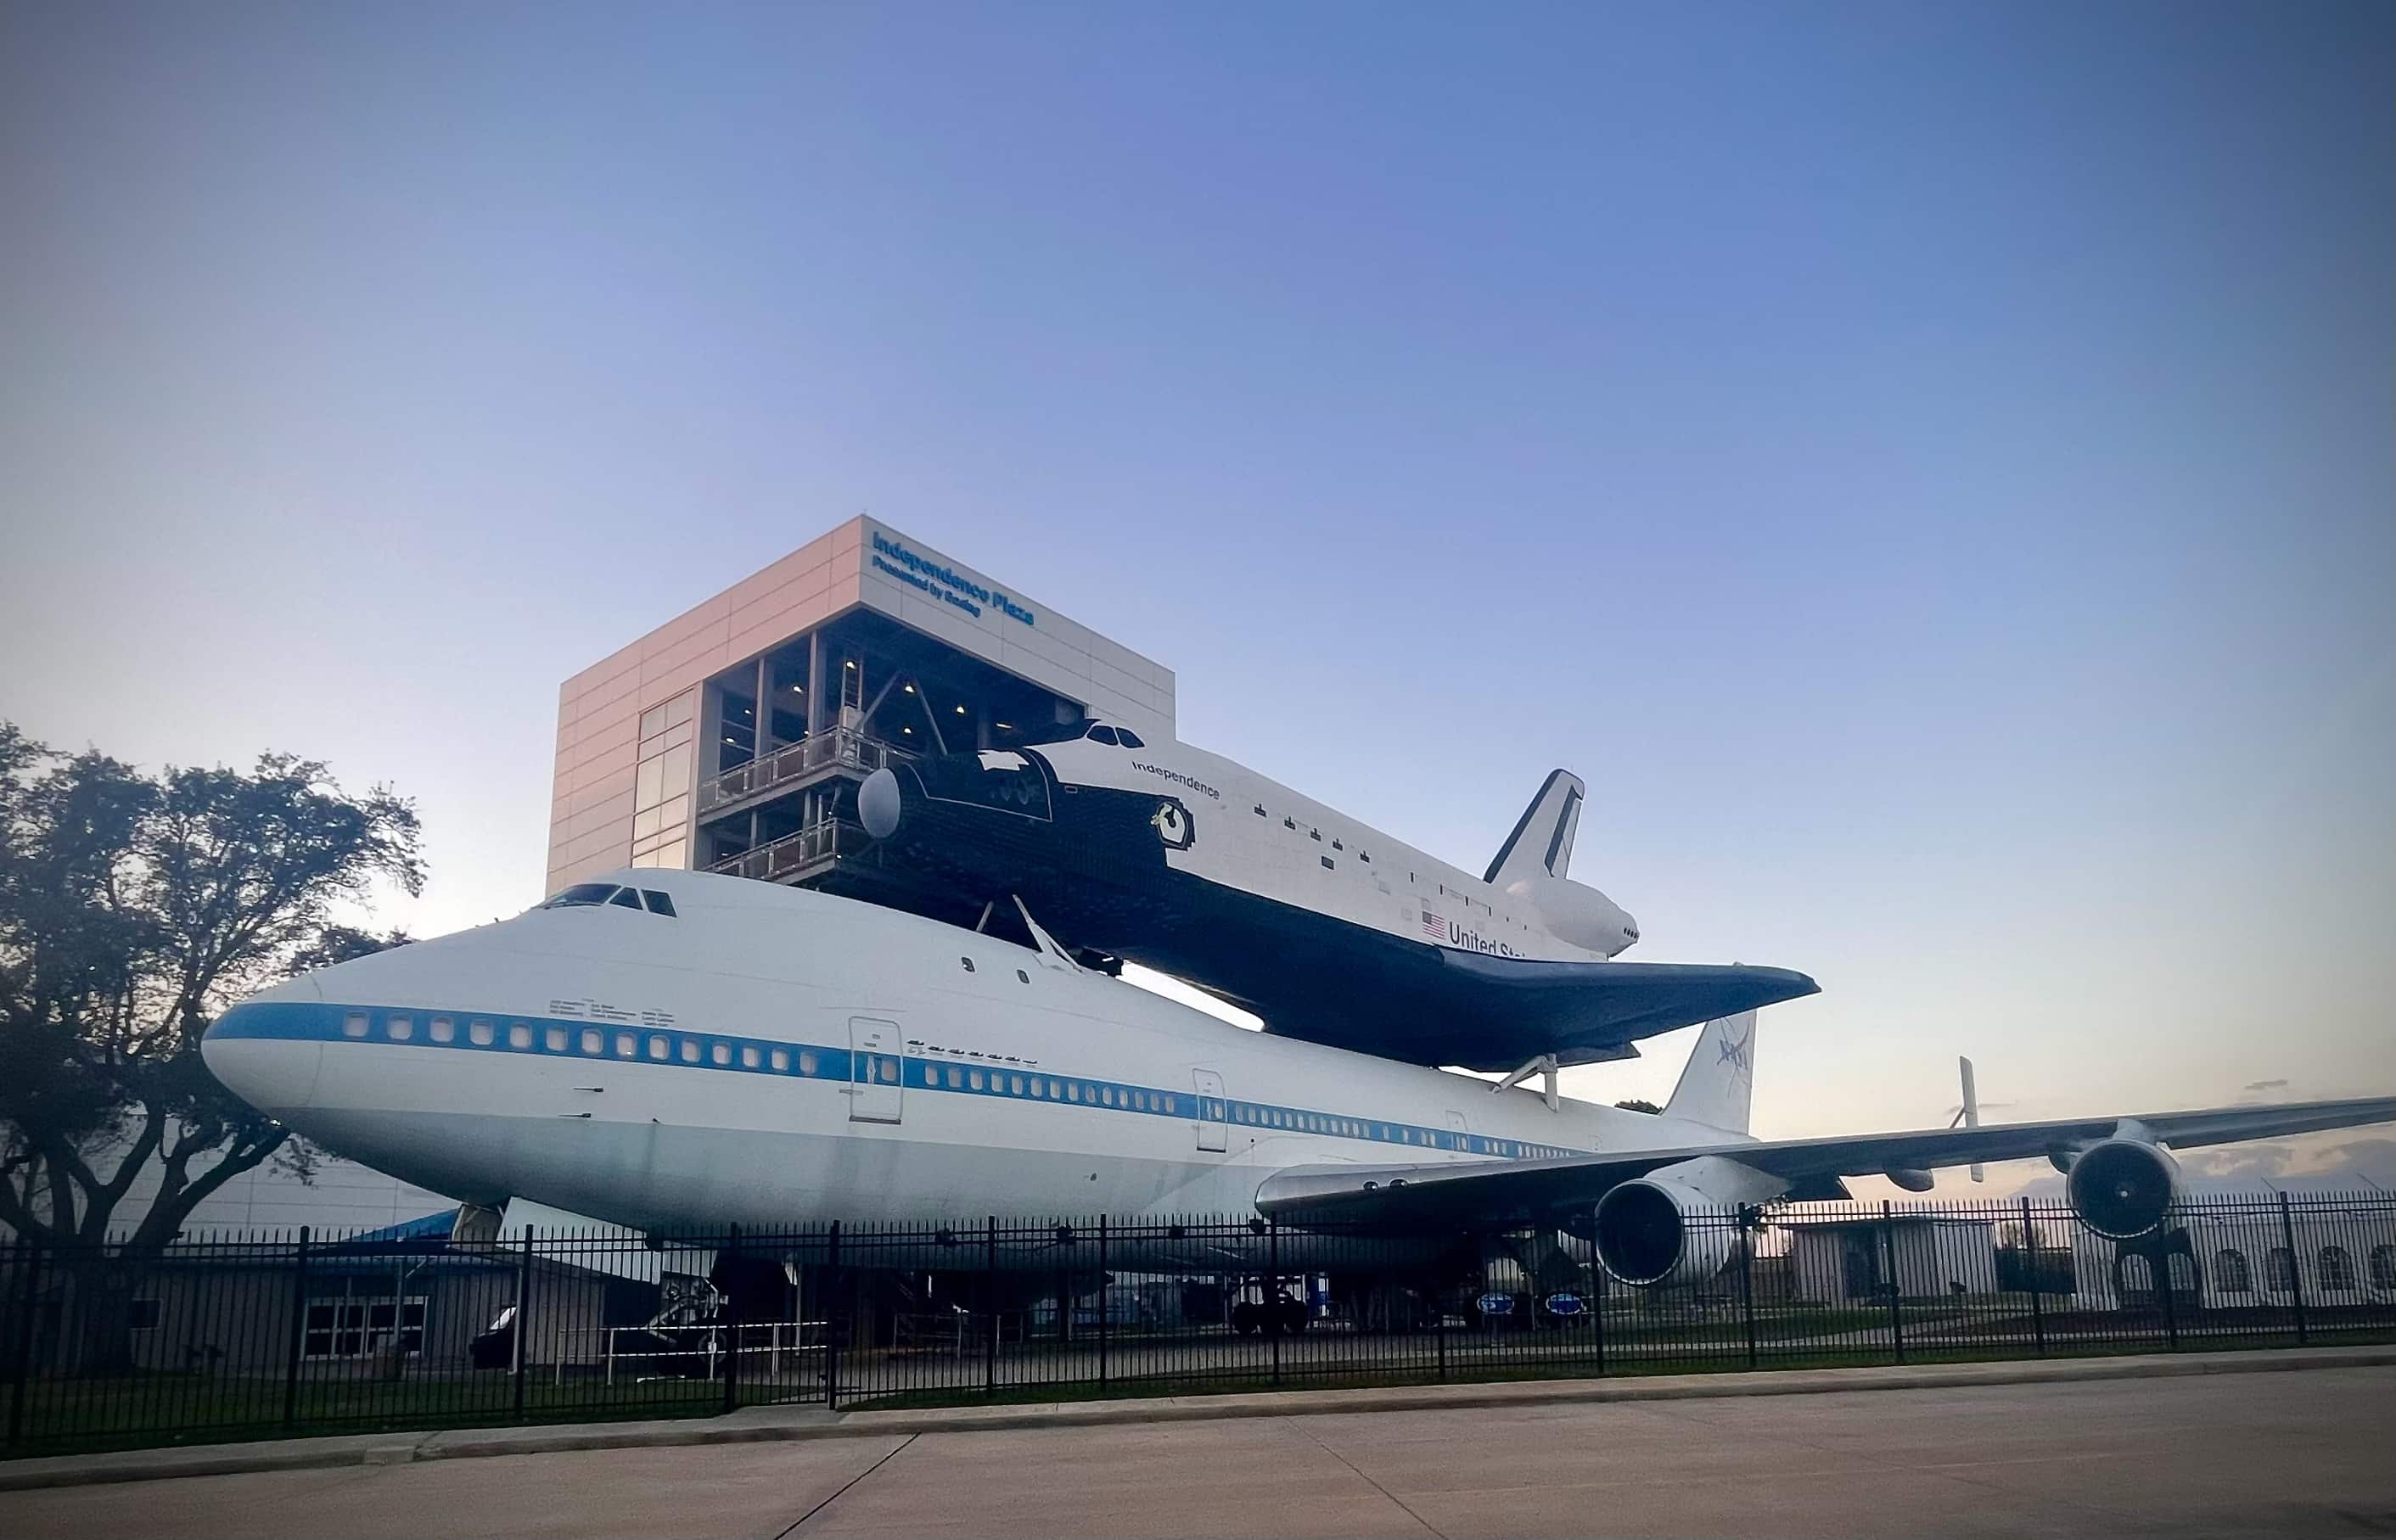 The space shuttle atop it's carrier plane outside the Houston Space Center.